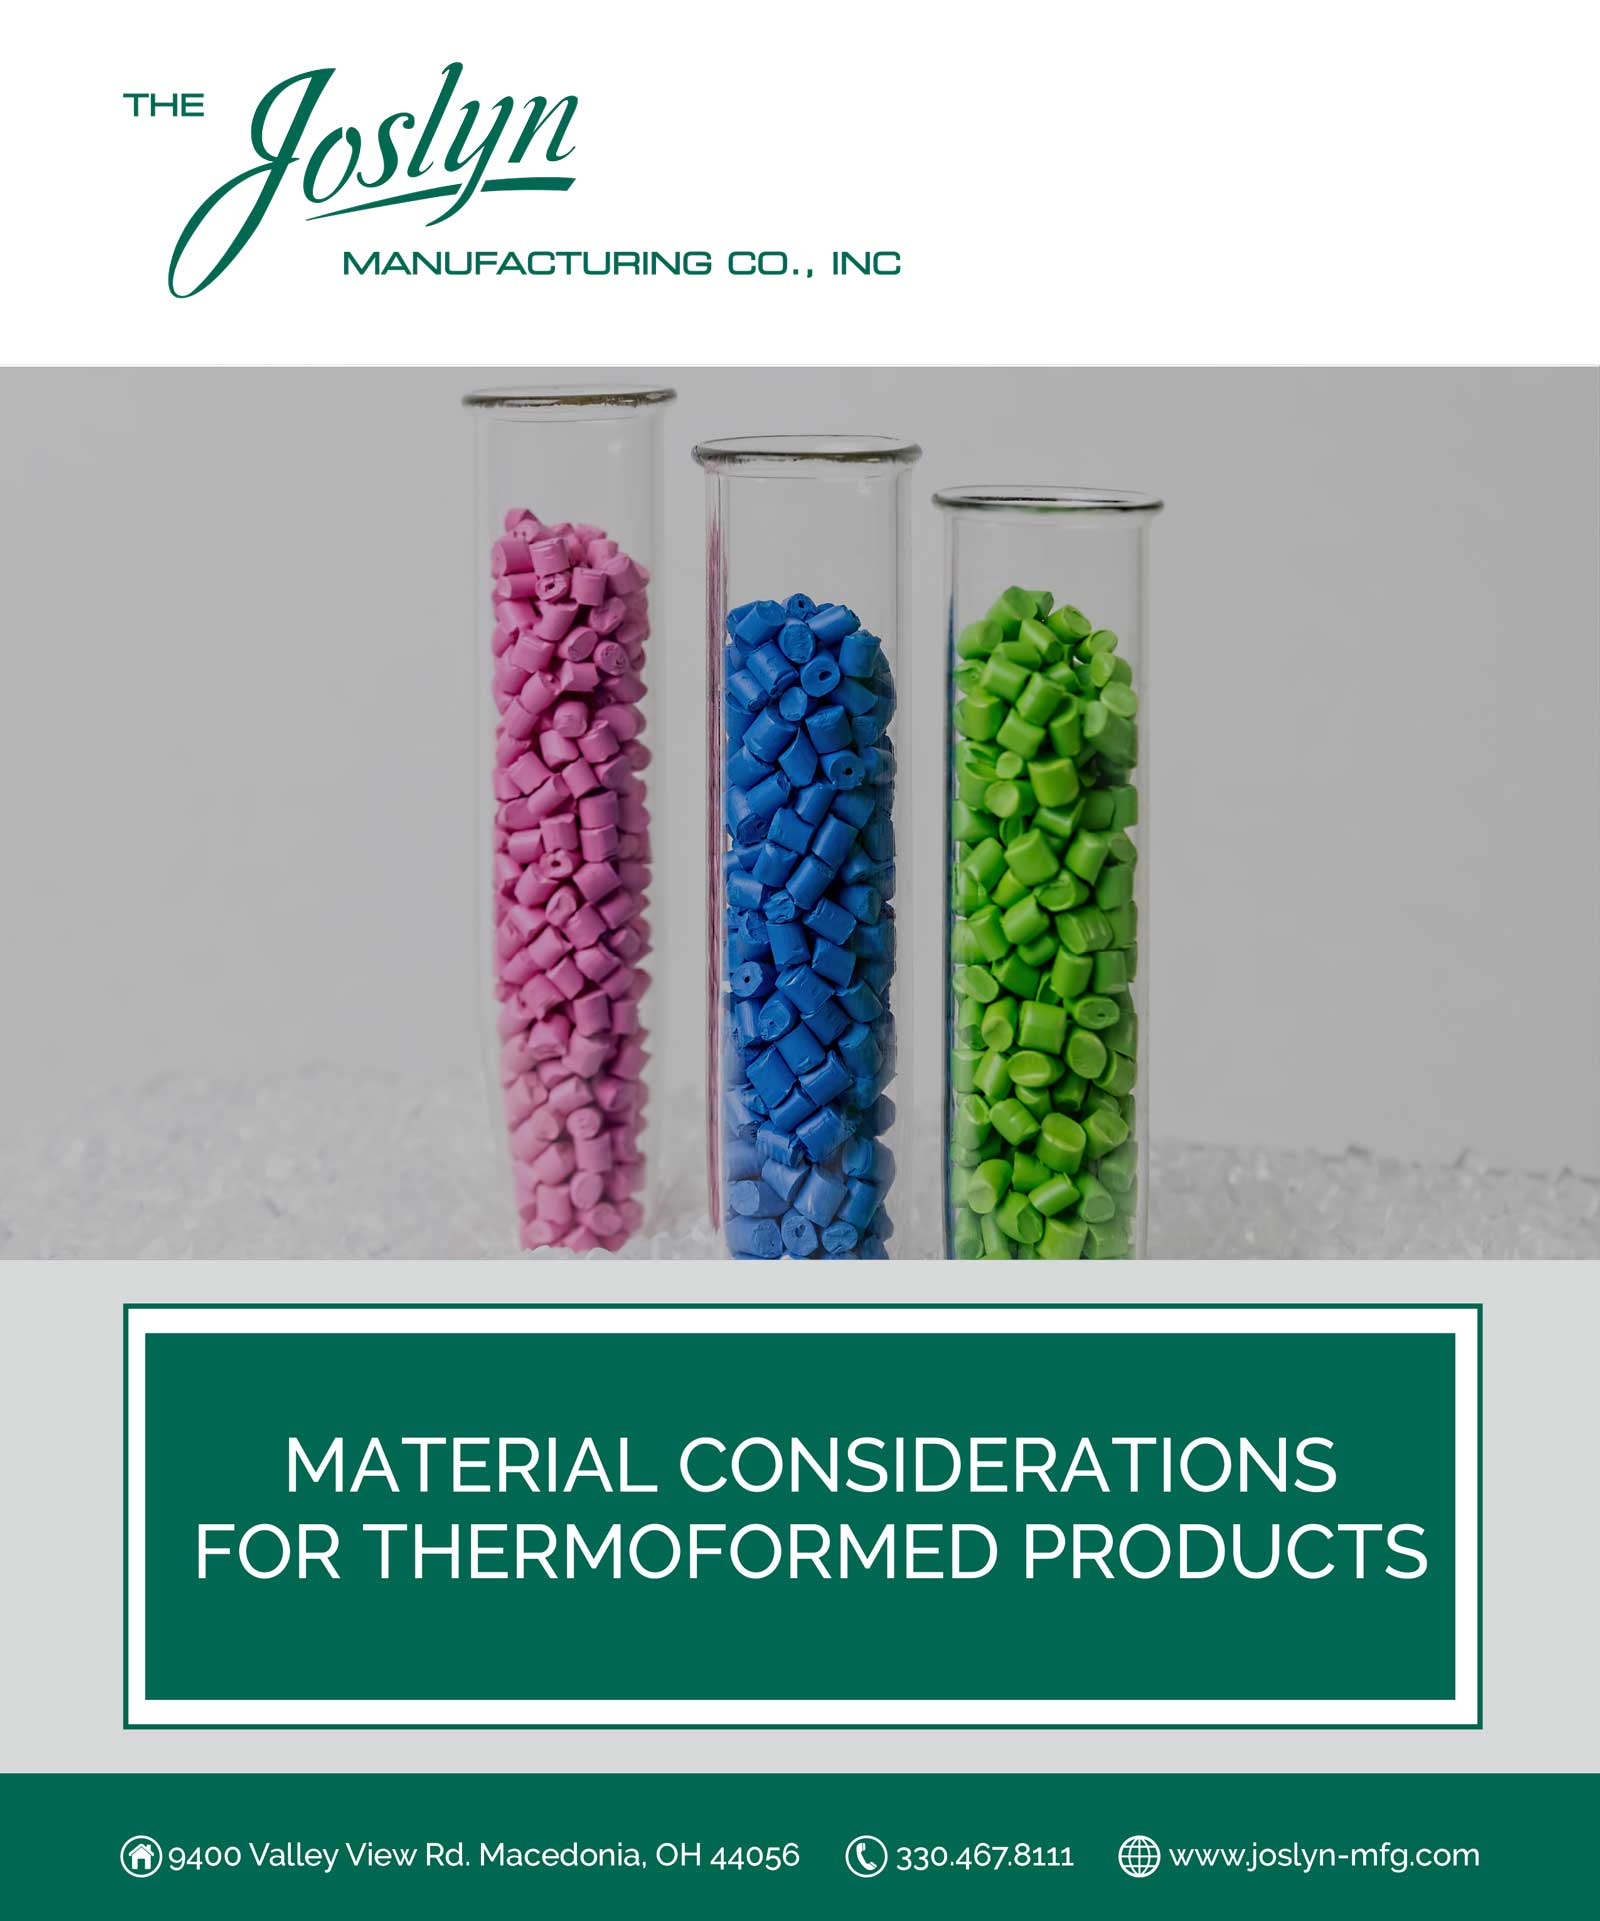 All About Thermoplastic as Manufacturing Material